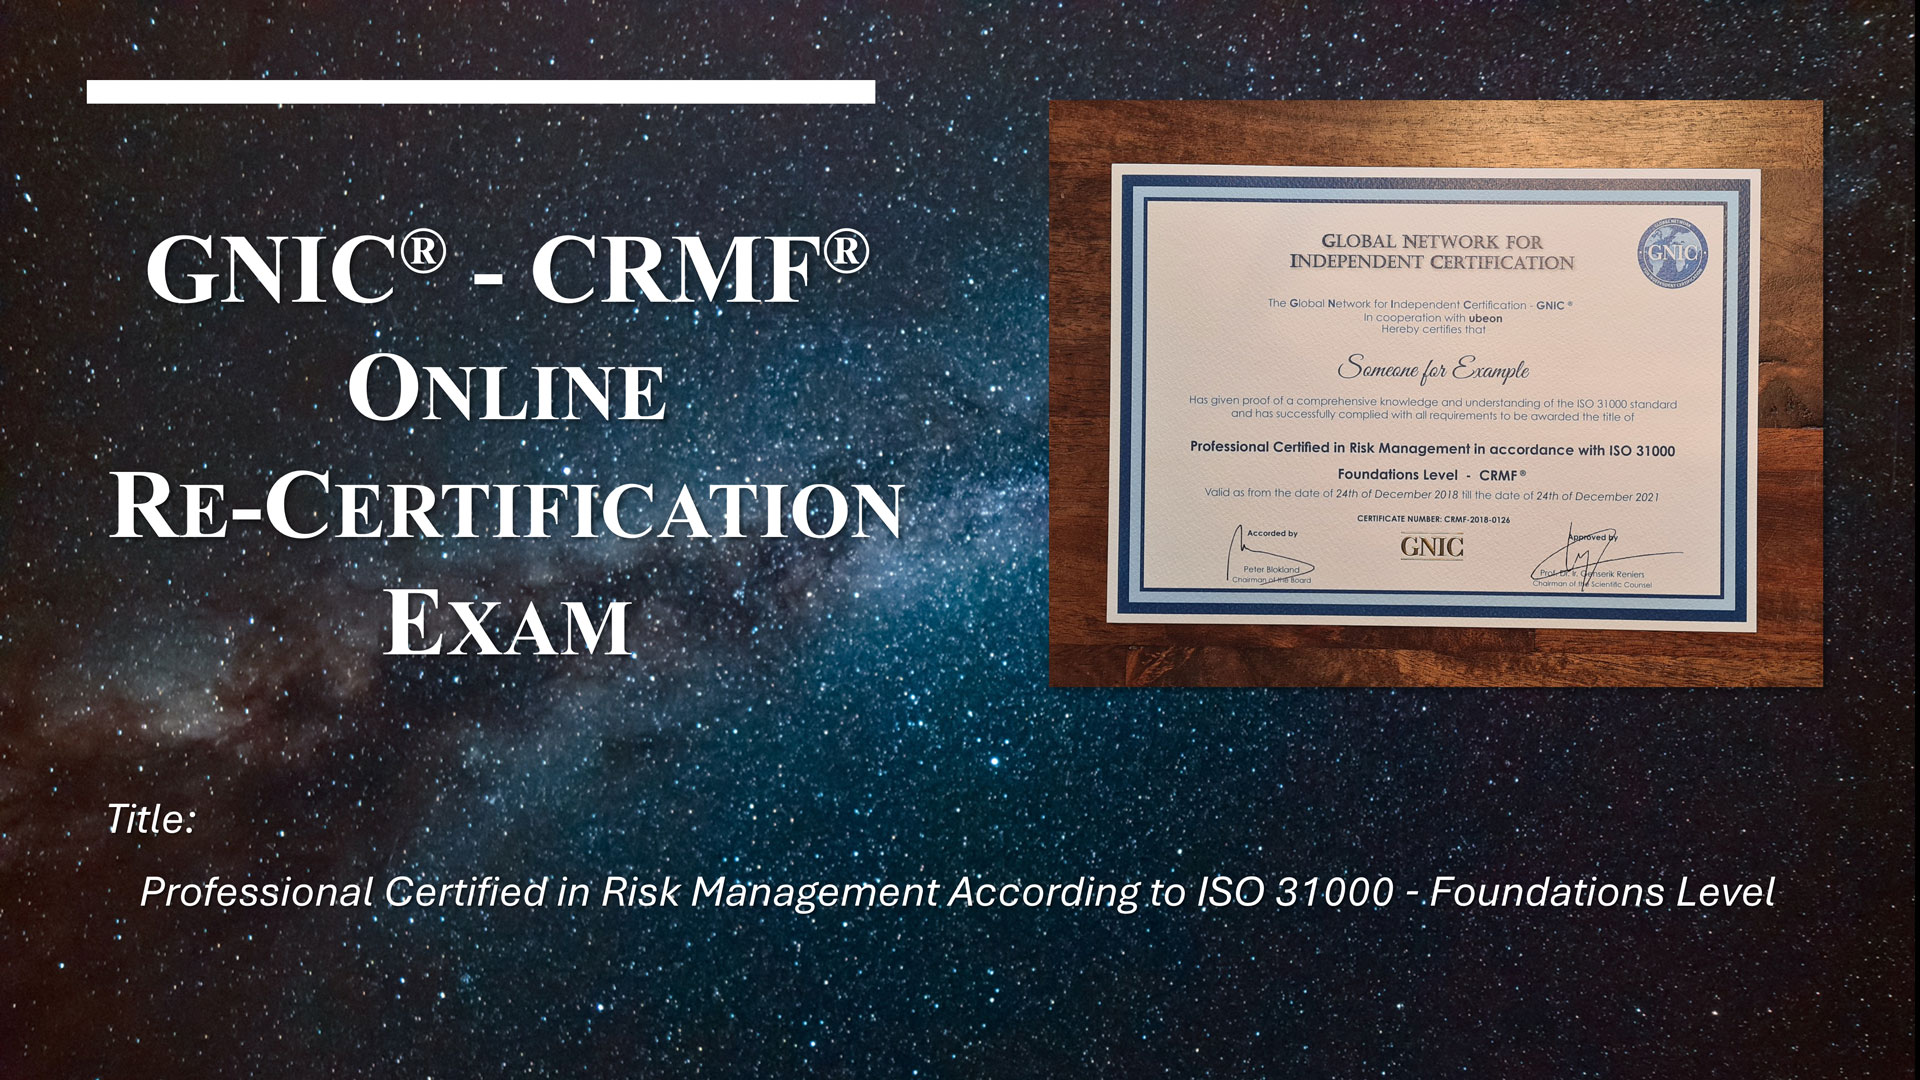 GNIC® CRMF® Re-Certification Exam